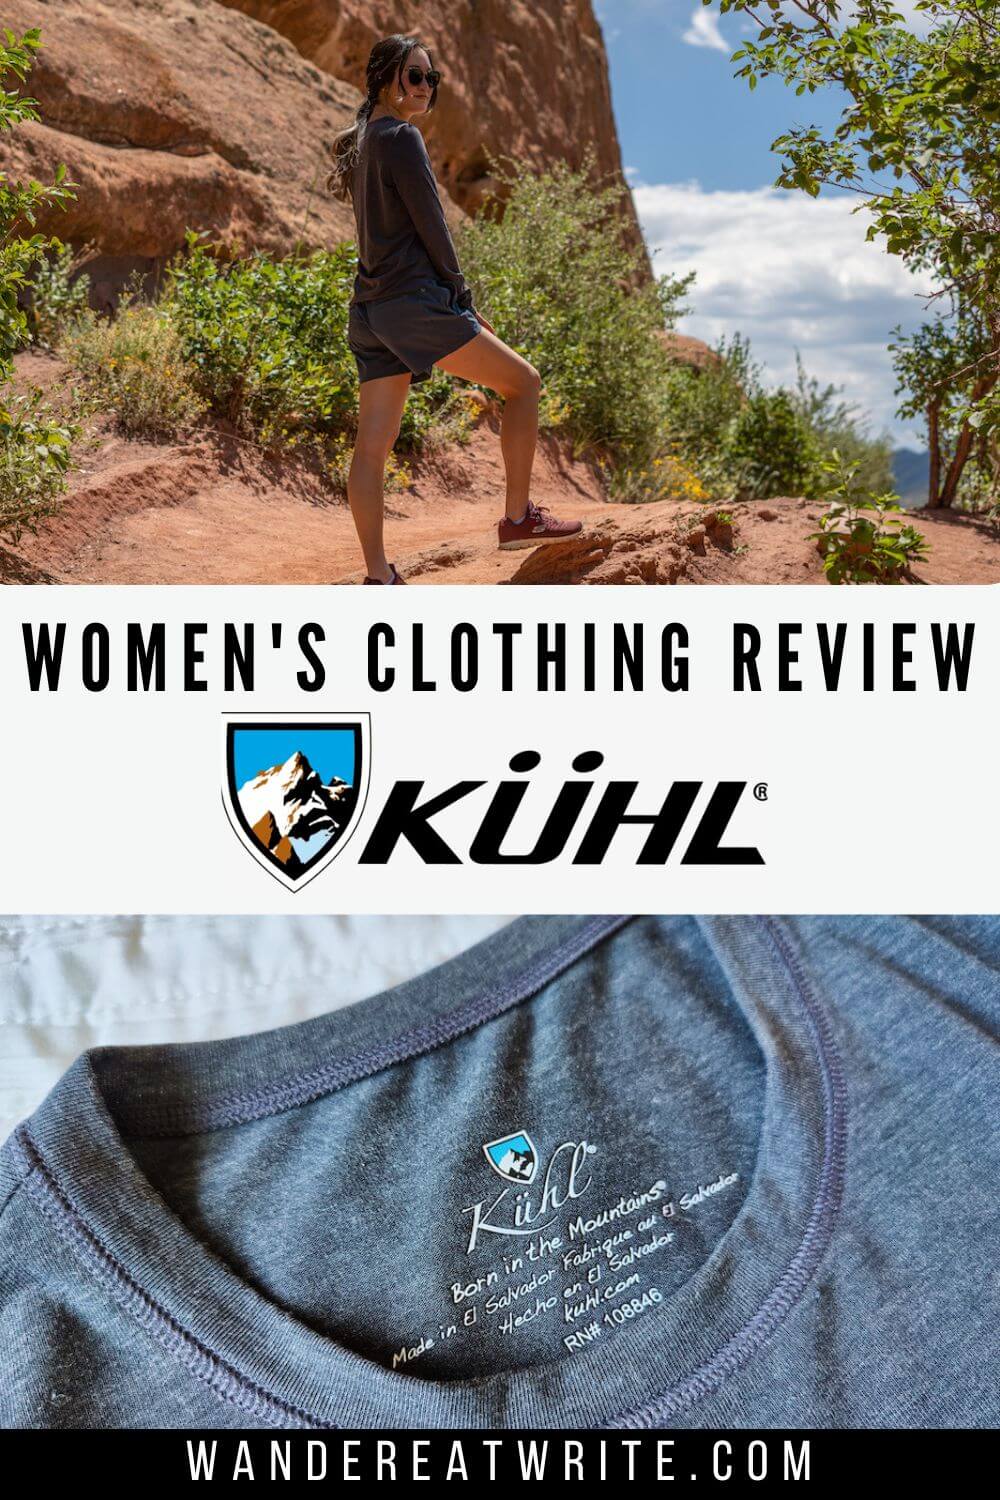 GEAR REVIEW: KUHL FREEFLEX WOMEN'S SHORTS - One World One Year